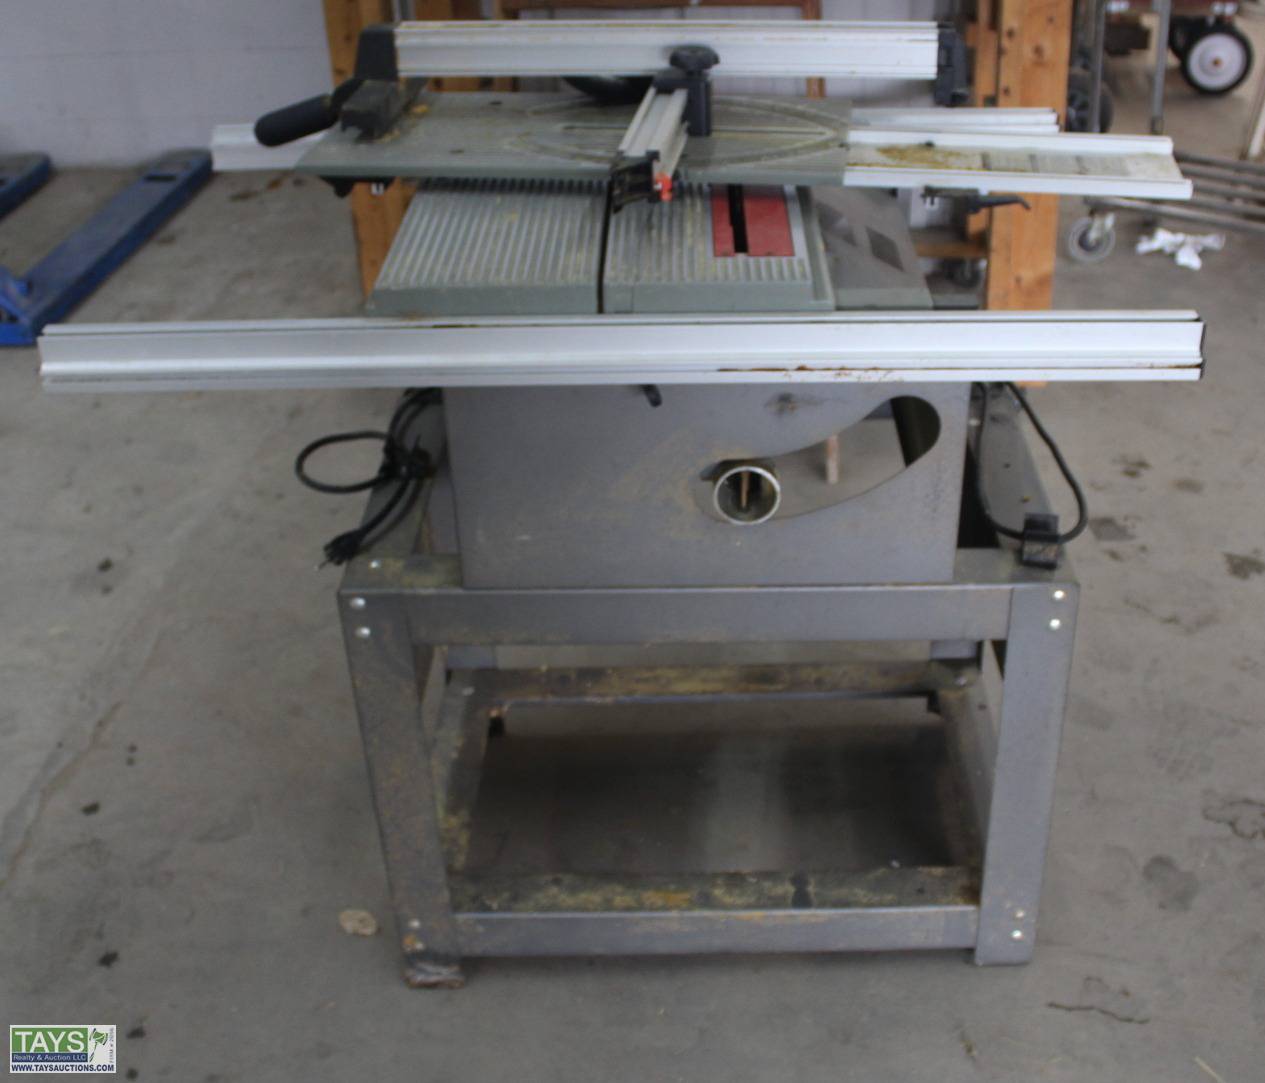 Tays Realty & Auction Auction: ONLINE ABSOLUTE AUCTION: TRACTORS - VEHICLES - TOOLS HEAVY EQUIPMENT ITEM: Ryobi BT3000 Table Saw